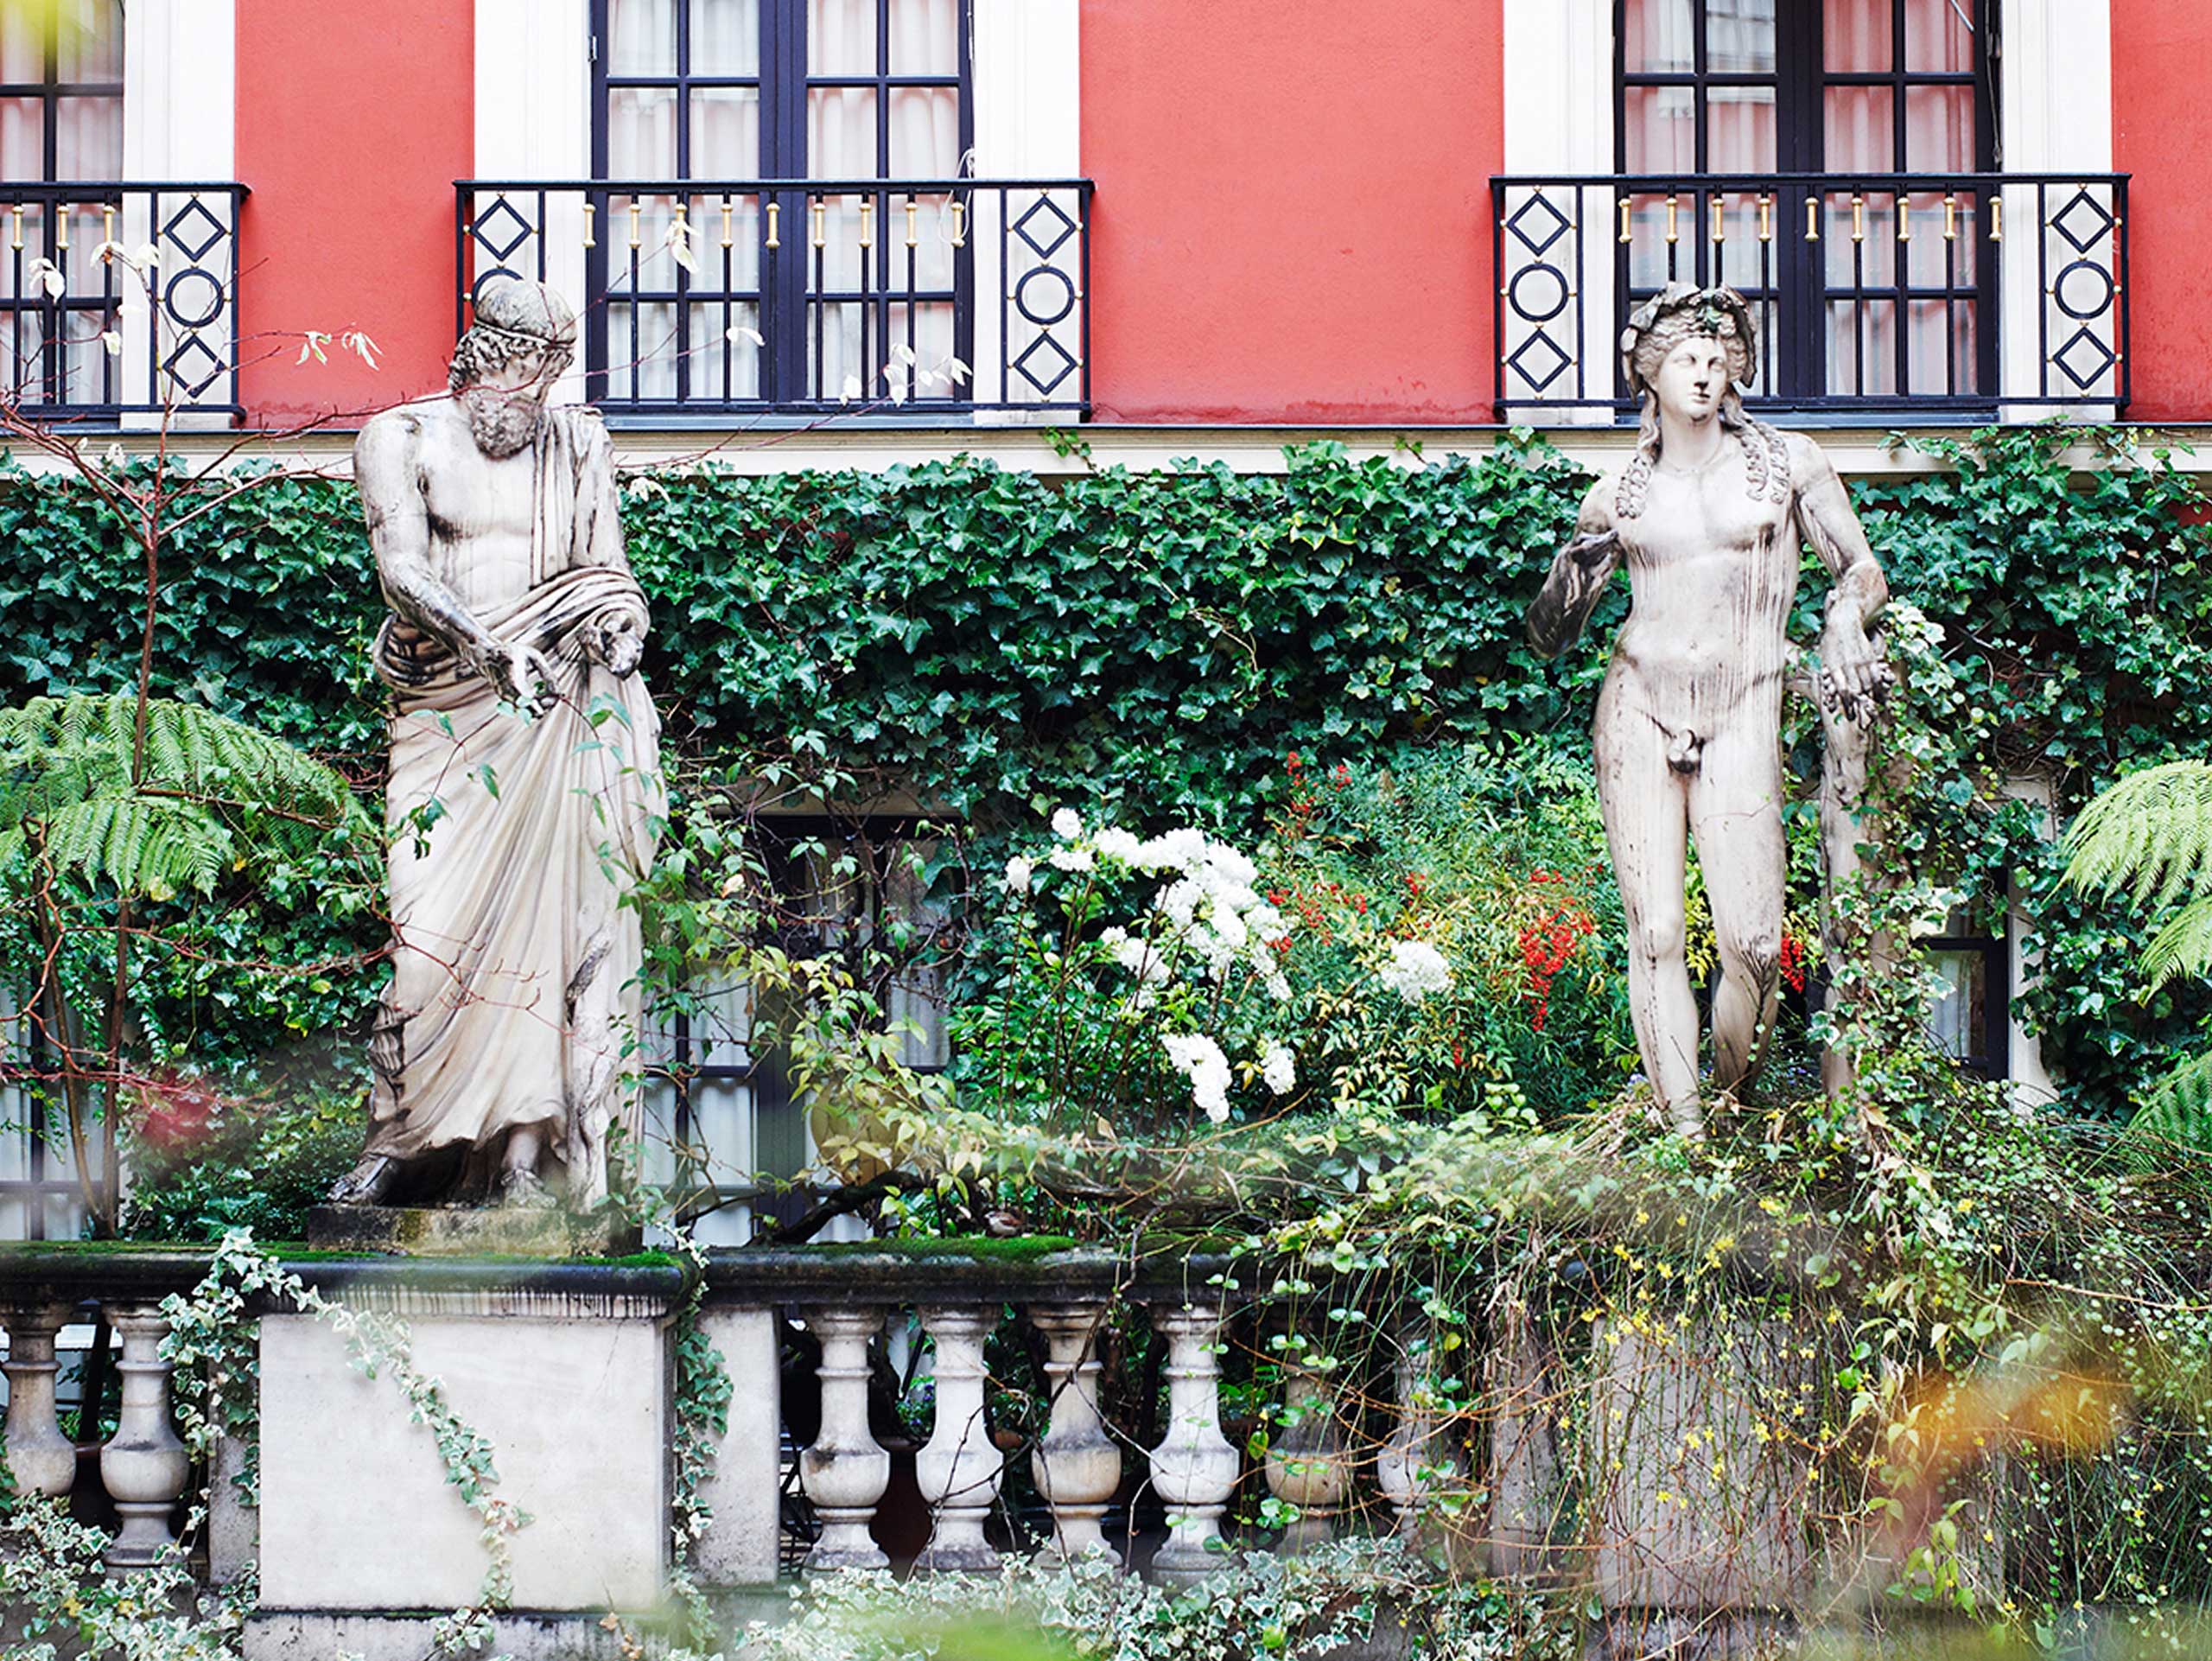 The interior courtyard of H<span>&#xF4;</span>tel Costes in Paris features sprawling ivy and large statues